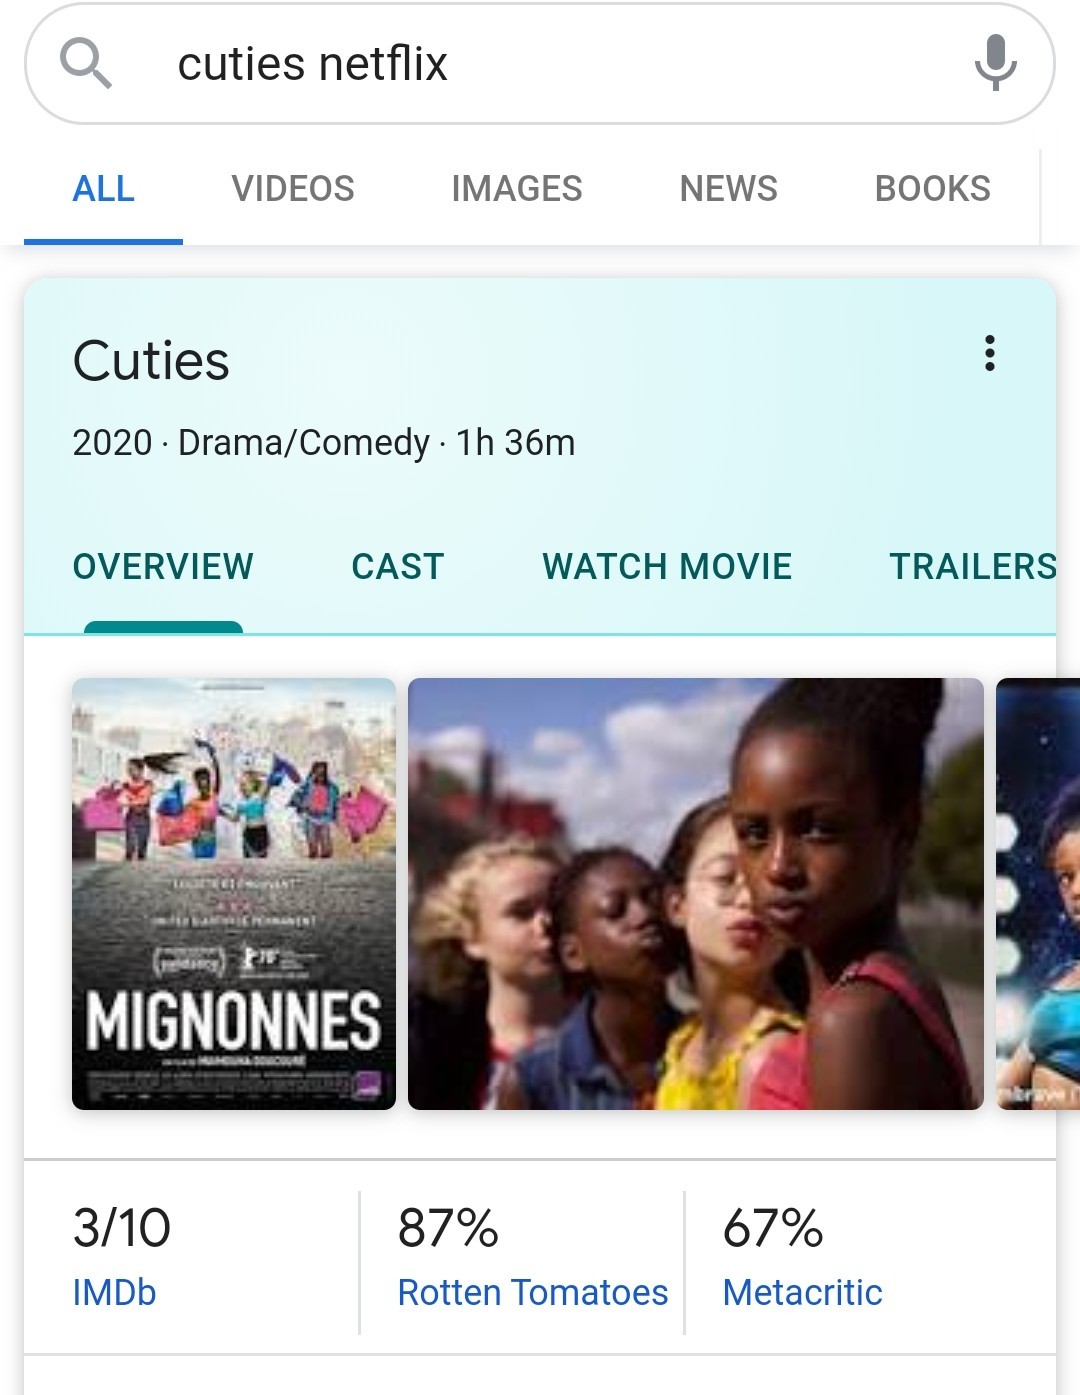 how the fuck does it have good ratings on rotten tomatoes and metacritic. Pedophiles everywhere. And how is it a drama/comedy - meme